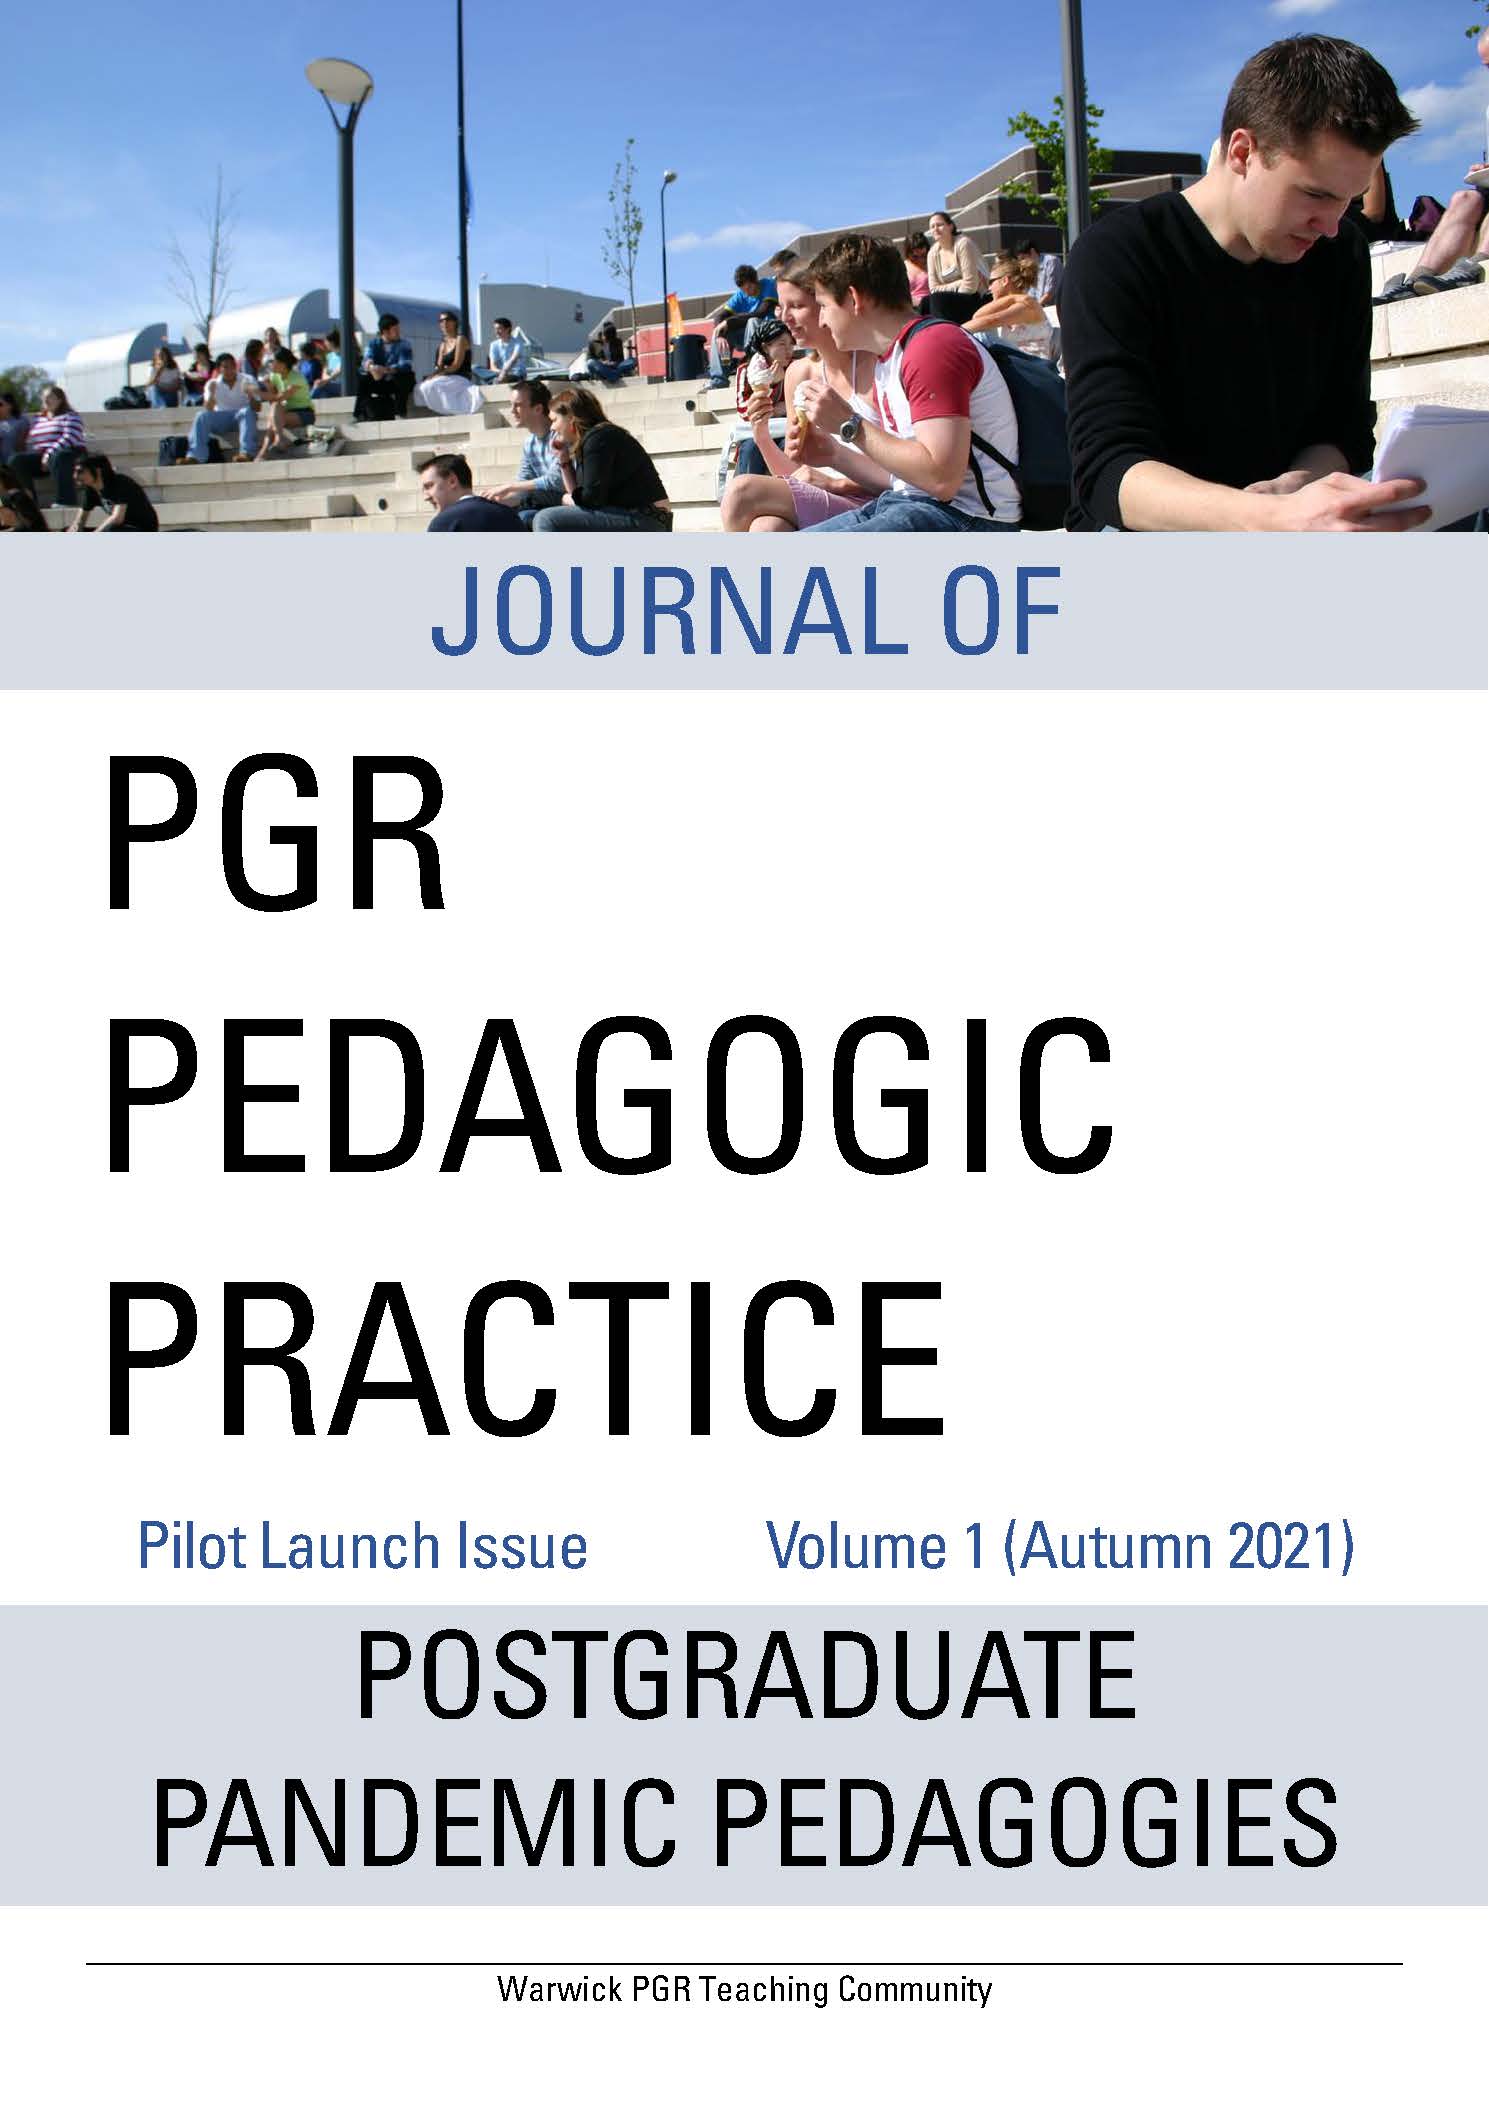 Cover image of the first issue of JPPP